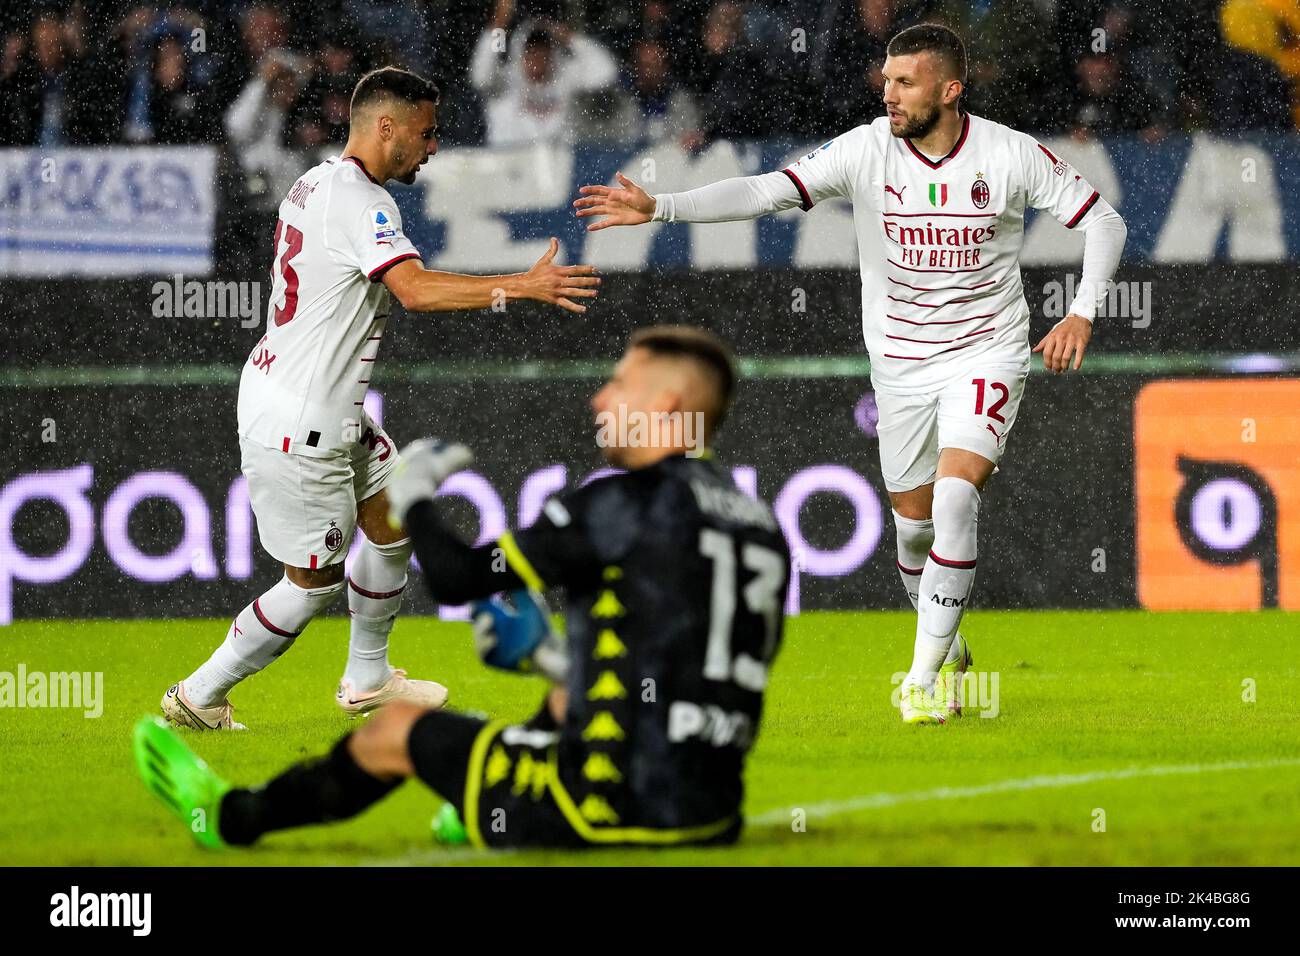 Empoli, Italy. 01st Oct, 2022. Ante Rebic of AC Milan celebrates with Rade Krunic after scoring the goal of 0-1 during the Serie A football match between Empoli FC and AC Milan at Carlo Castellani stadium in Empoli (Italy), October 1st, 2022. Photo Paolo Nucci/Insidefoto Credit: Insidefoto di andrea staccioli/Alamy Live News Stock Photo